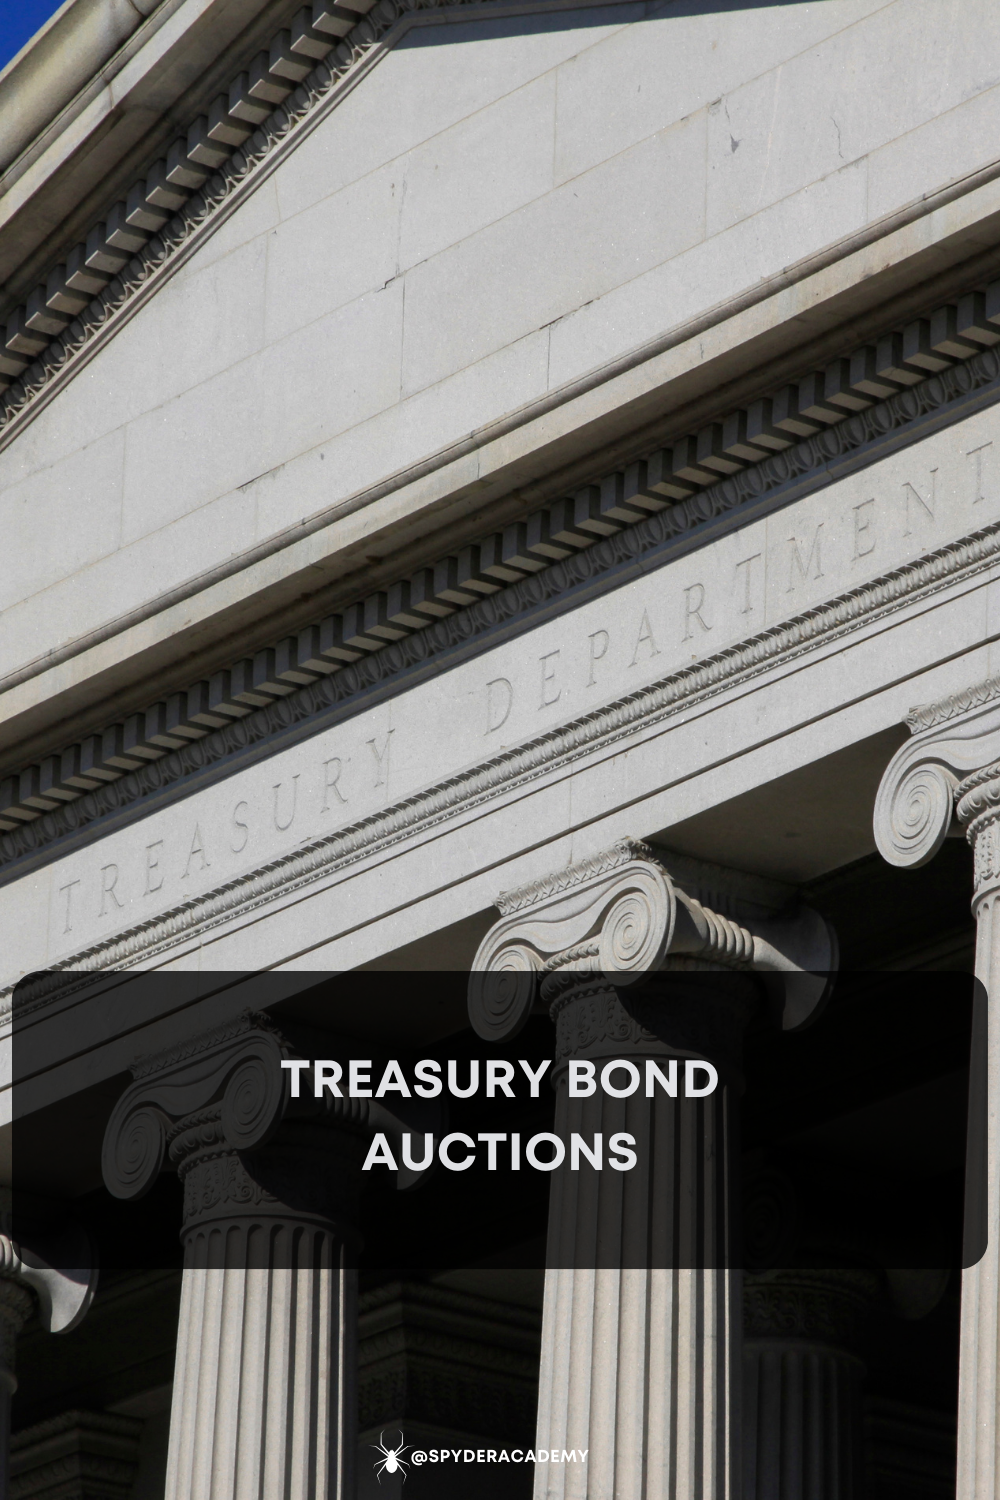 Discover Spyder Academy's Bonds command, a powerful tool designed to position your trading plan in anticipation of Treasury sales announcements.